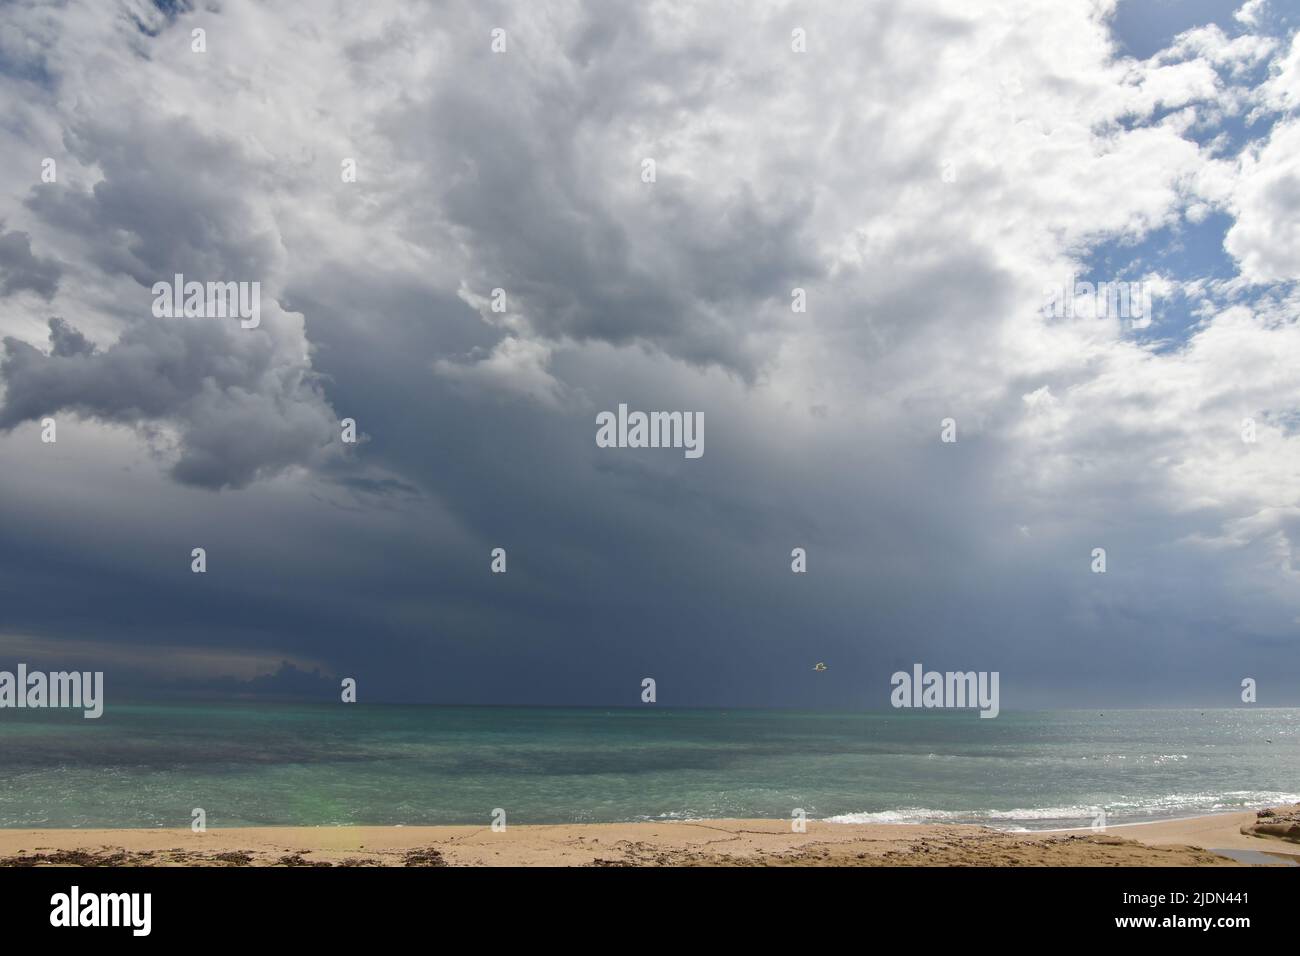 Stormy clouds over a sandy beach of Salento in Italy. Stock Photo